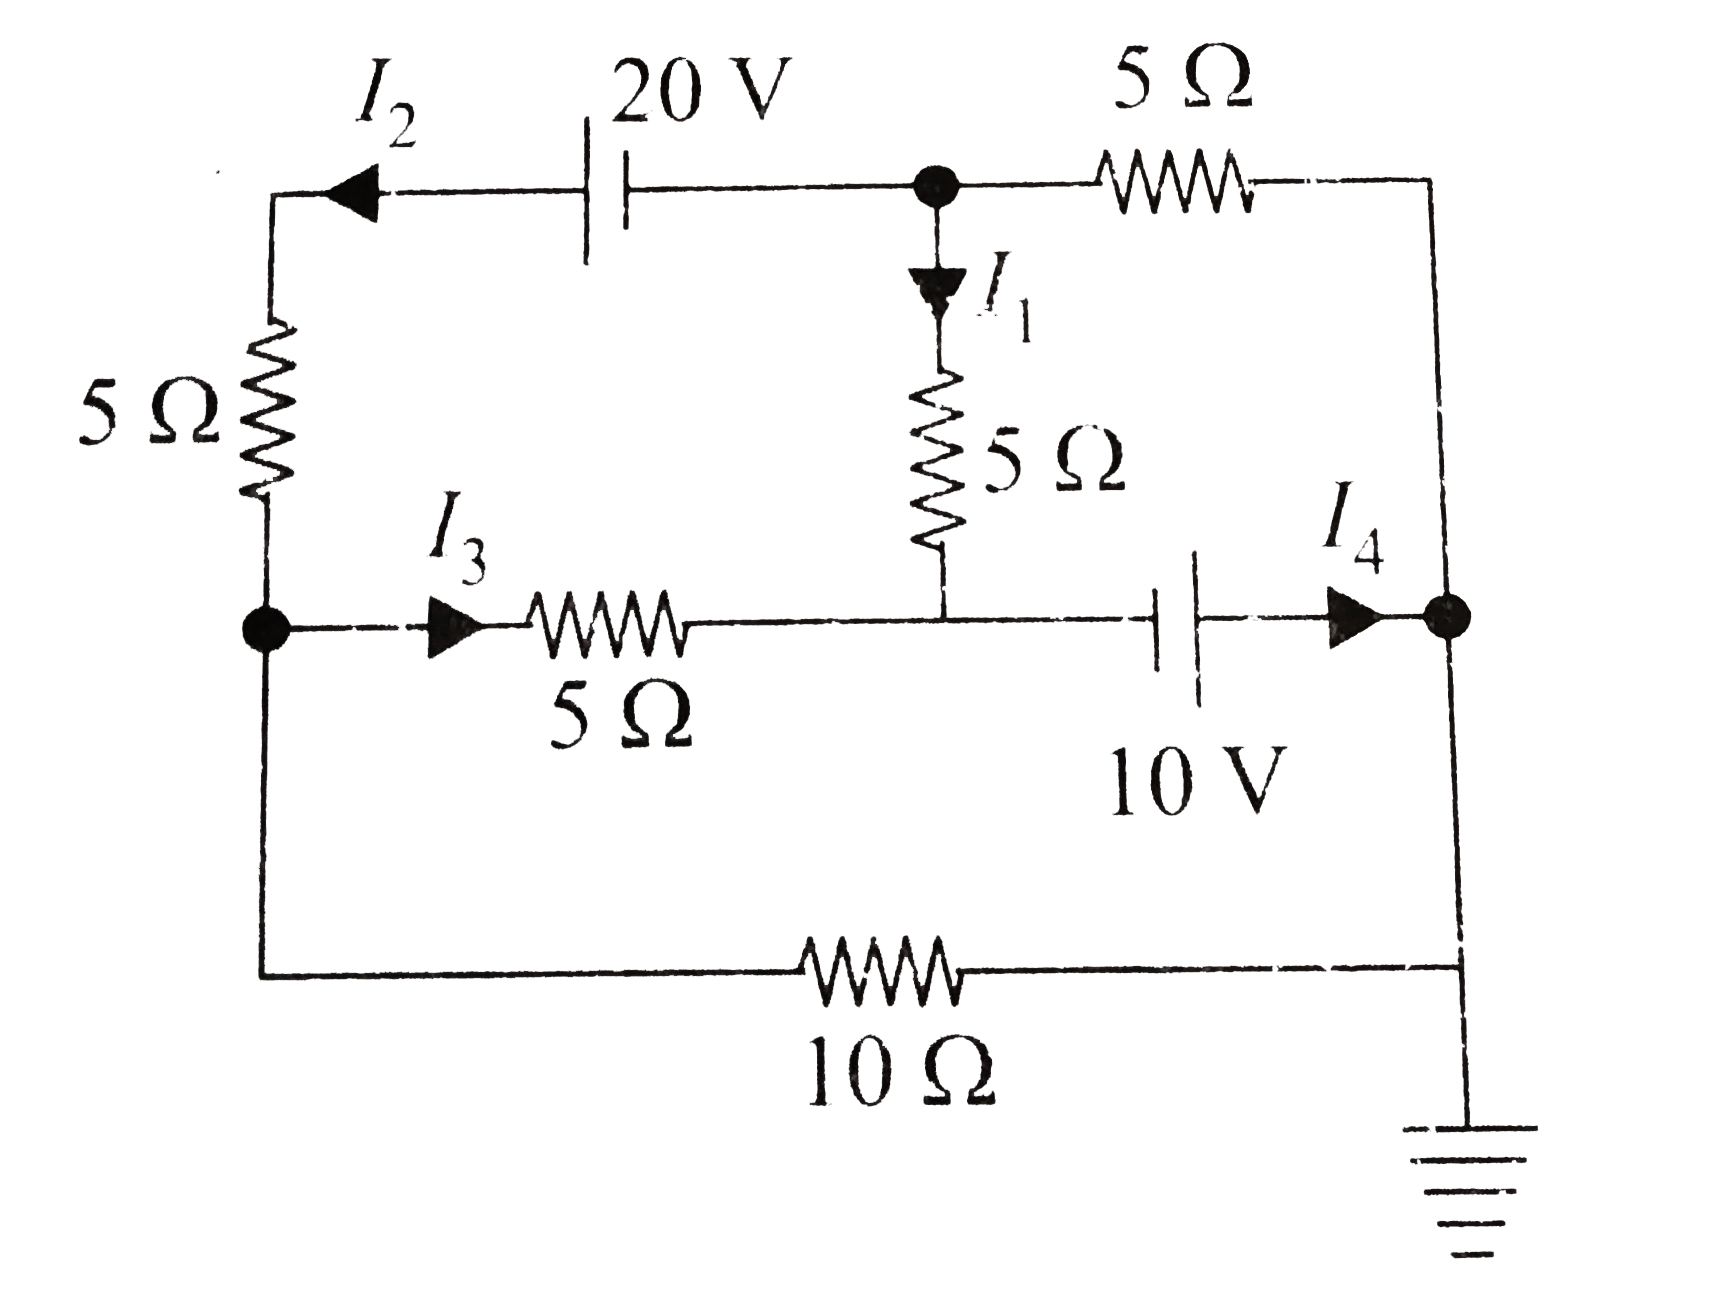 In the circuit shown in the figure   .    The value of current I4 is